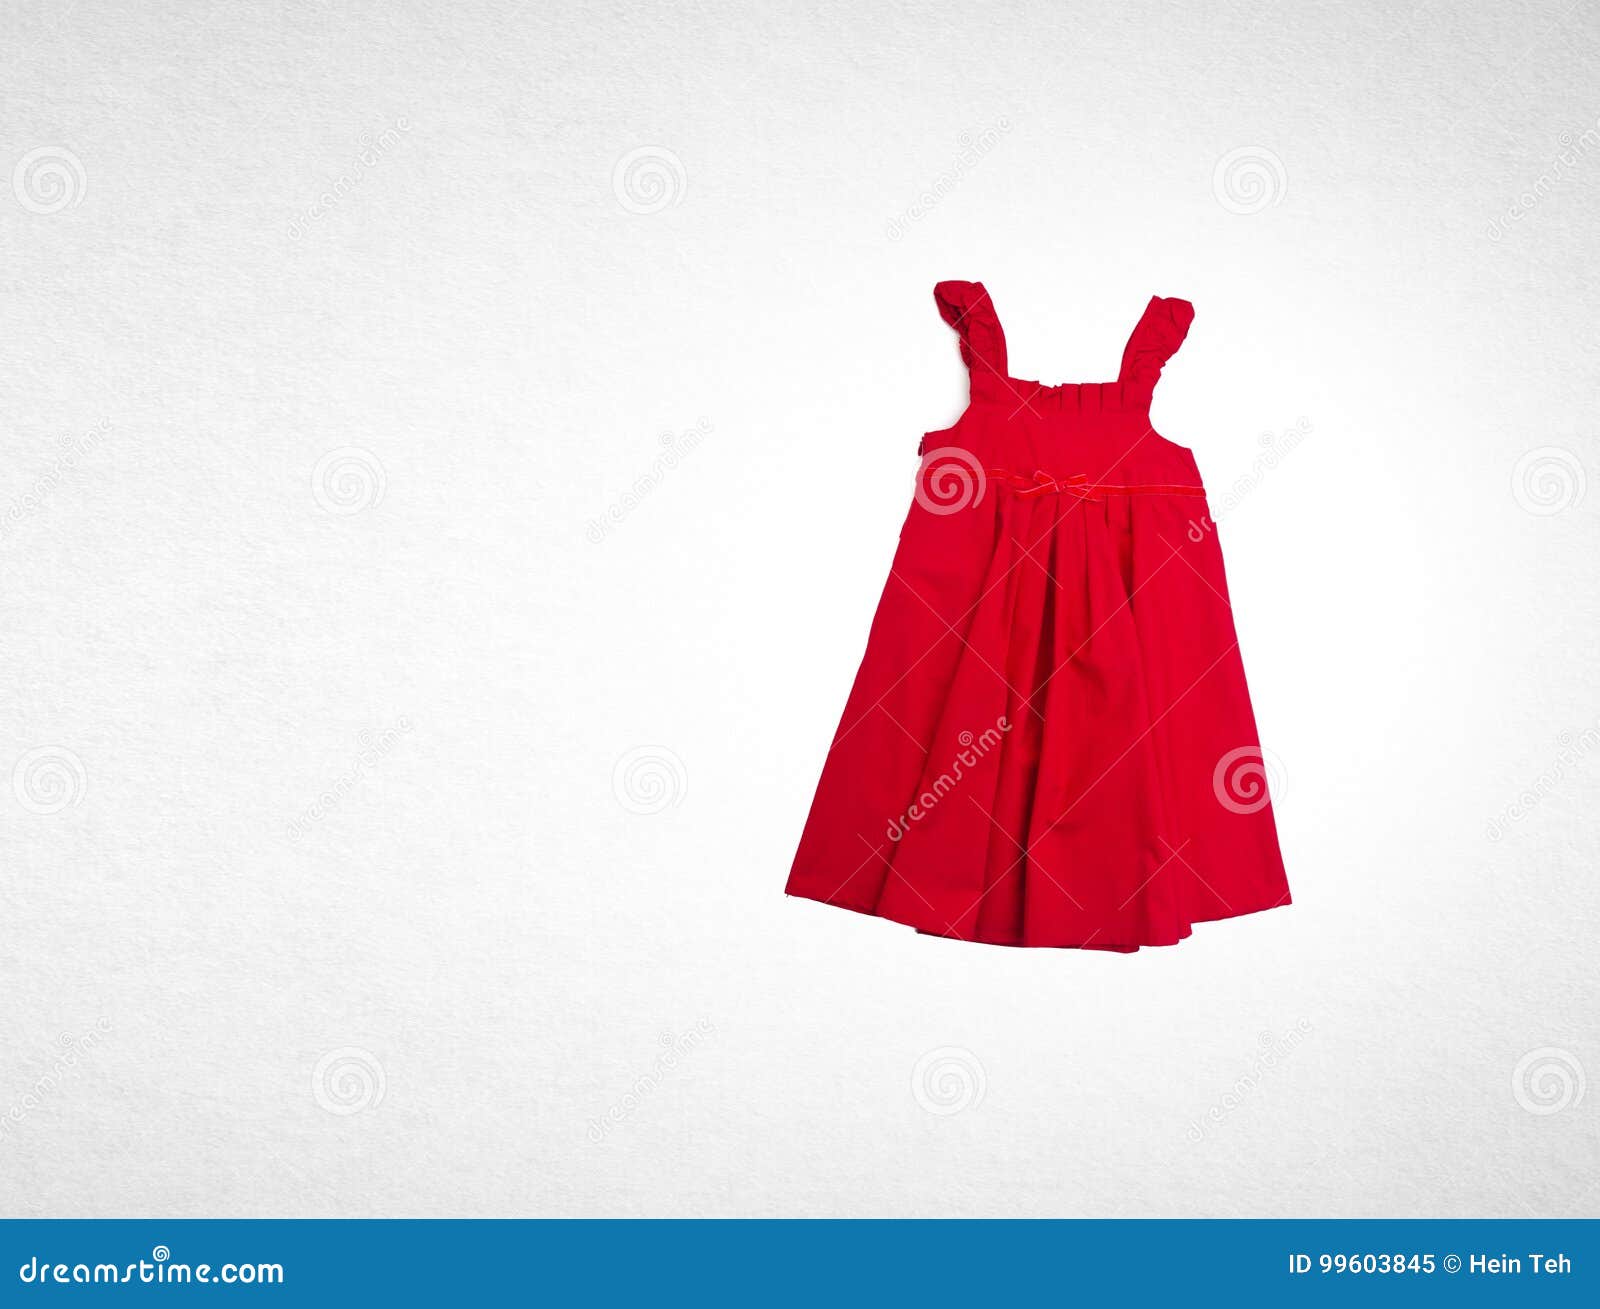 Dress or Dress for Kids in Red Color on a Background. Stock Image ...